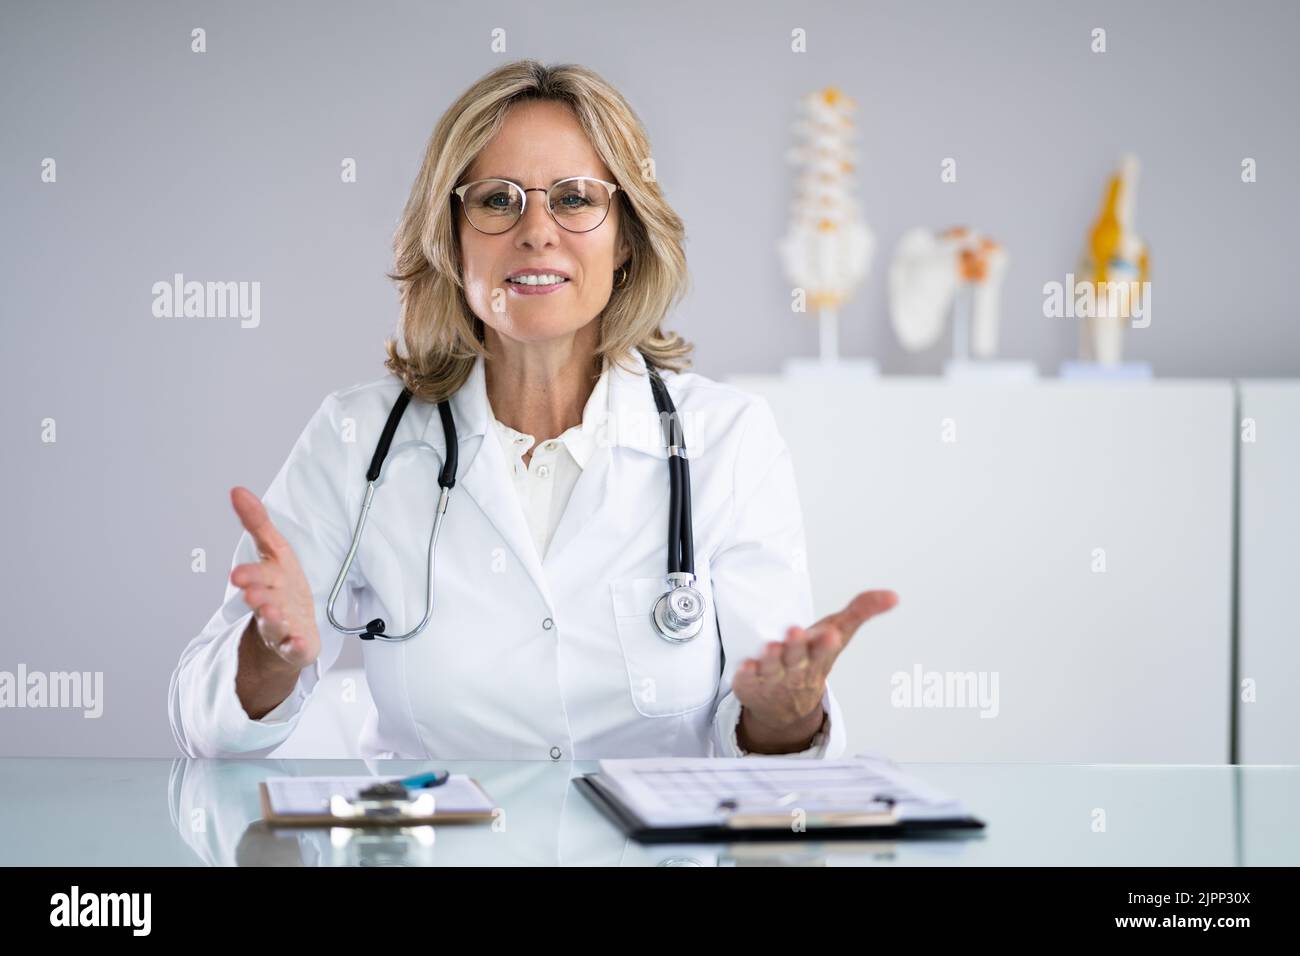 Woman Physician Doctor Video Conference Call Portrait Stock Photo